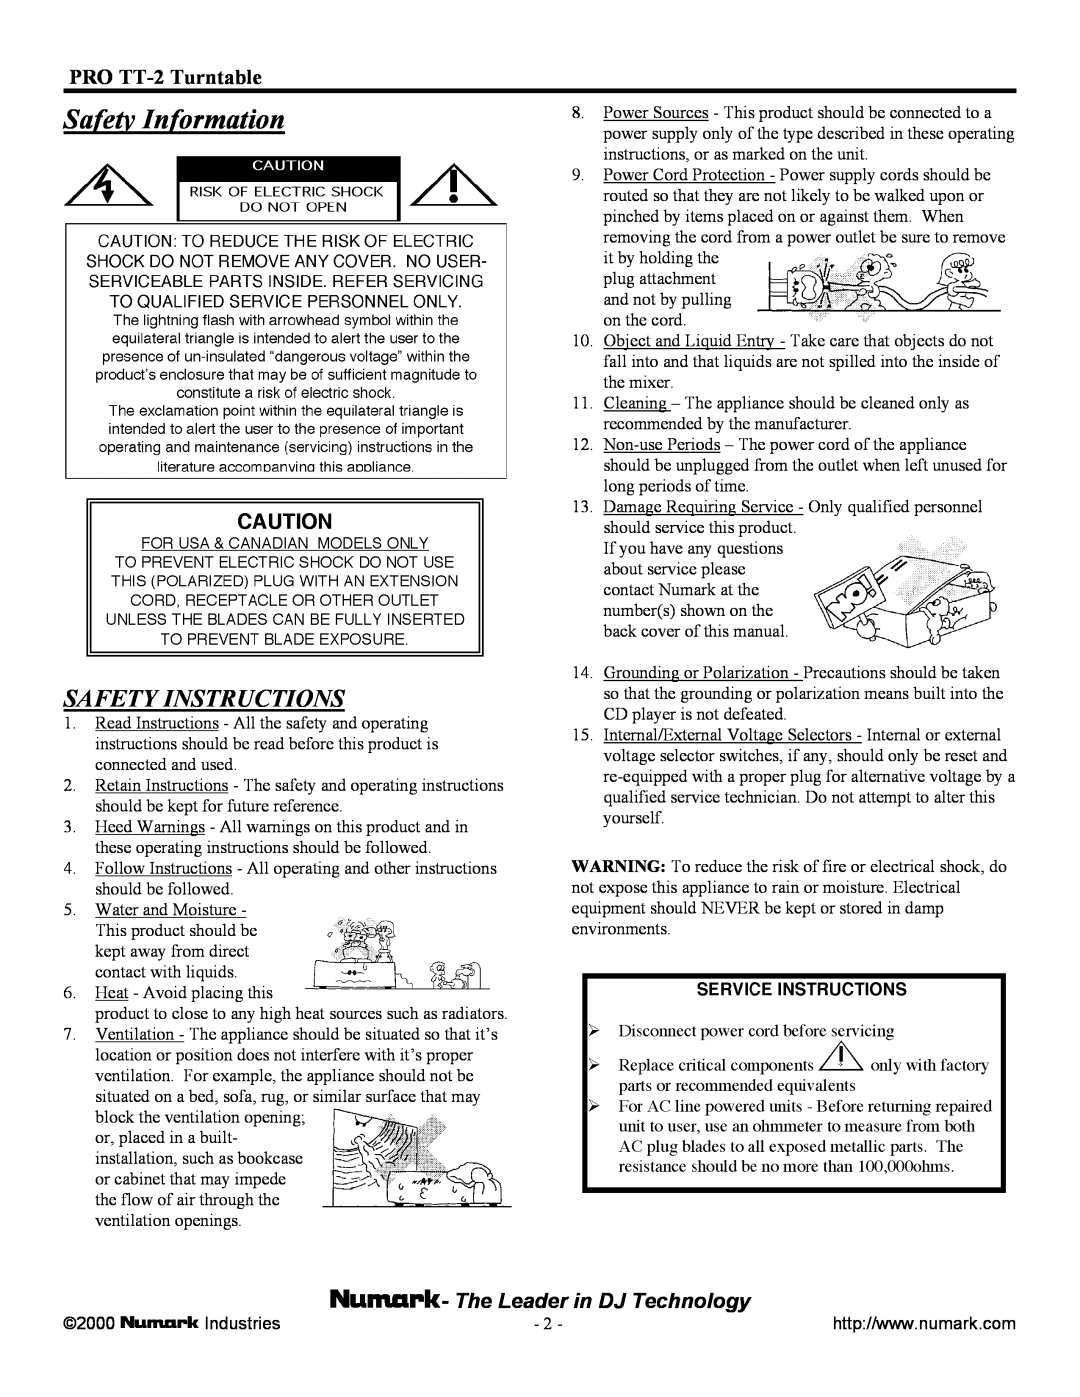 Numark Industries owner manual Safety Information, Safety Instructions, PRO TT-2Turntable, The Leader in DJ Technology 